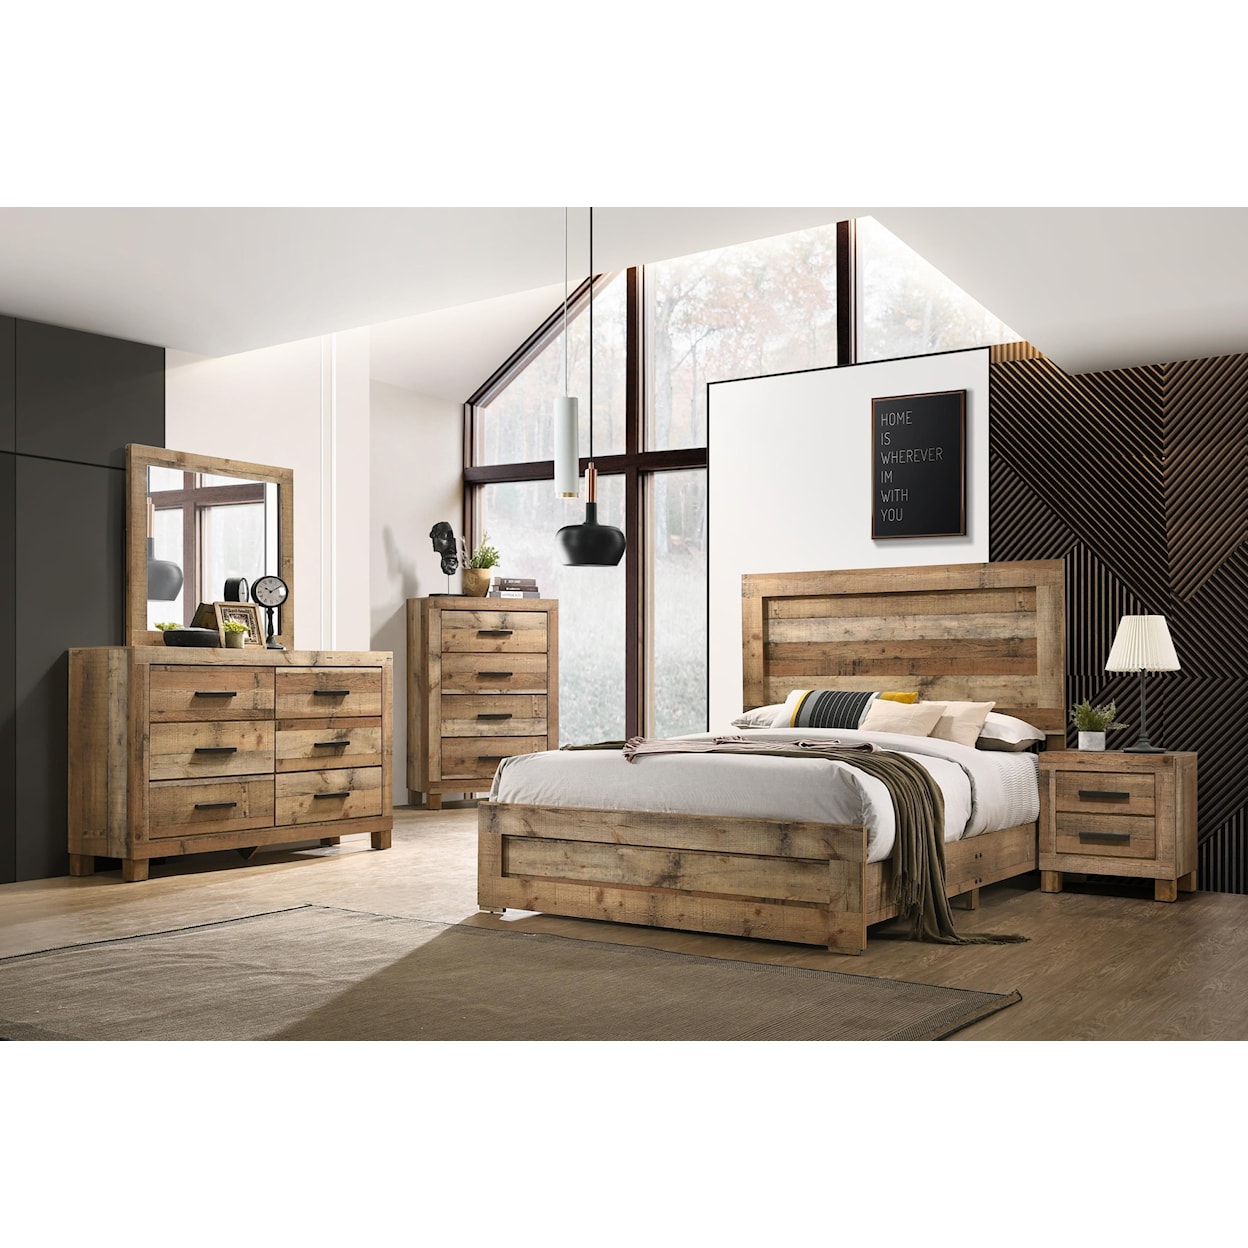 Lifestyle C8311A 6 Piece Queen Bedroom Group